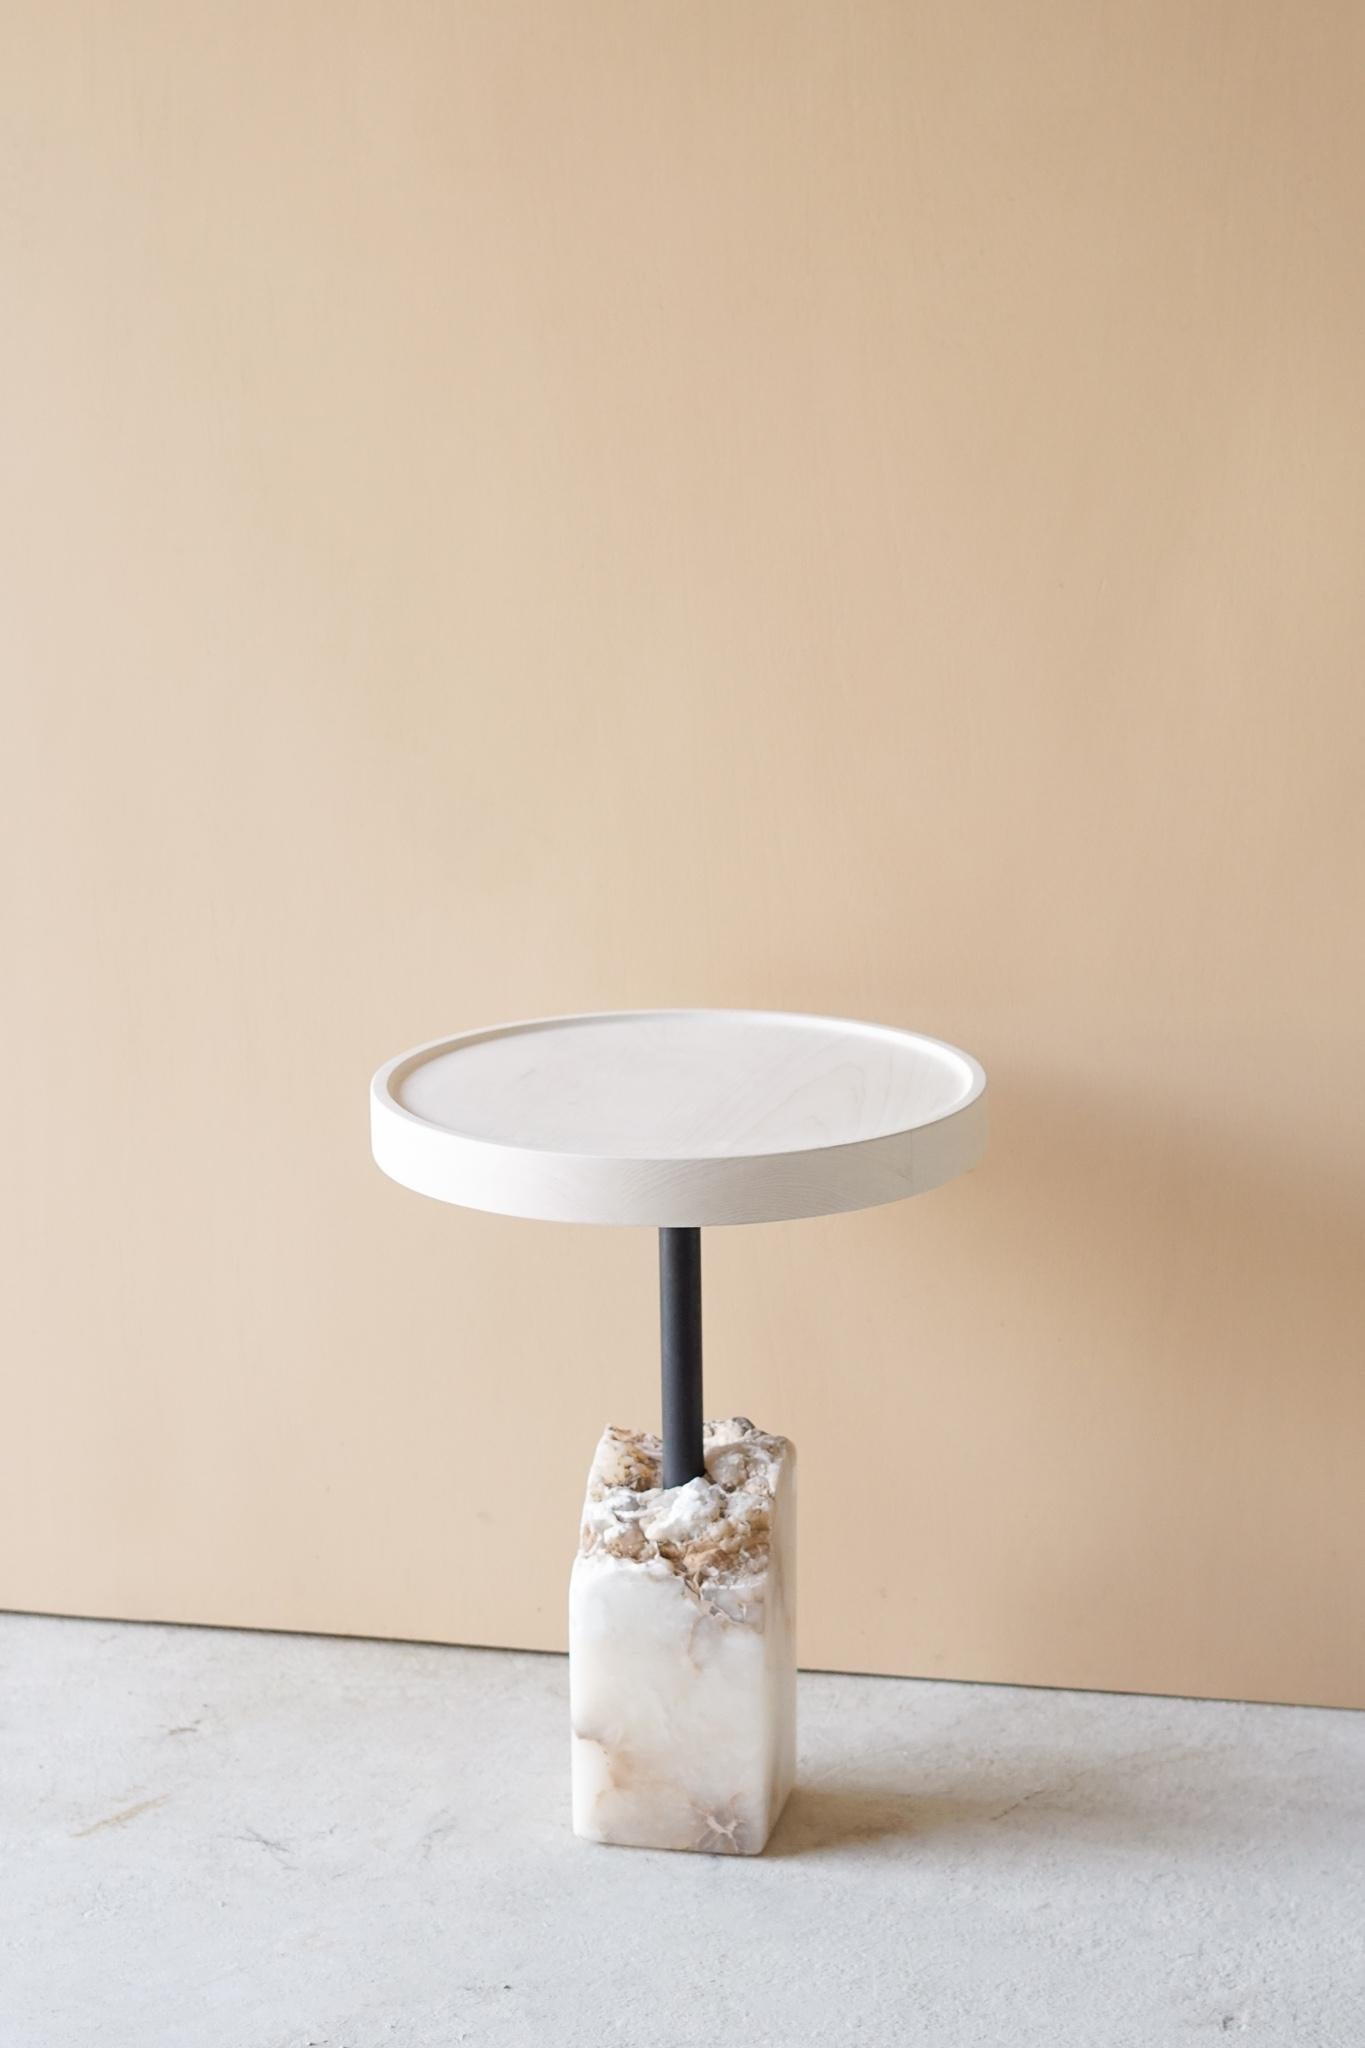 Bast side table by Swell Studio
Dimensions: D46 x W46 x H59 cm.
Material: bleached maple, white alabaster, blackened steel.

Bleached maple top floating above a fragmented piece of stone.

Swell Studio focuses on the design and fabrication of